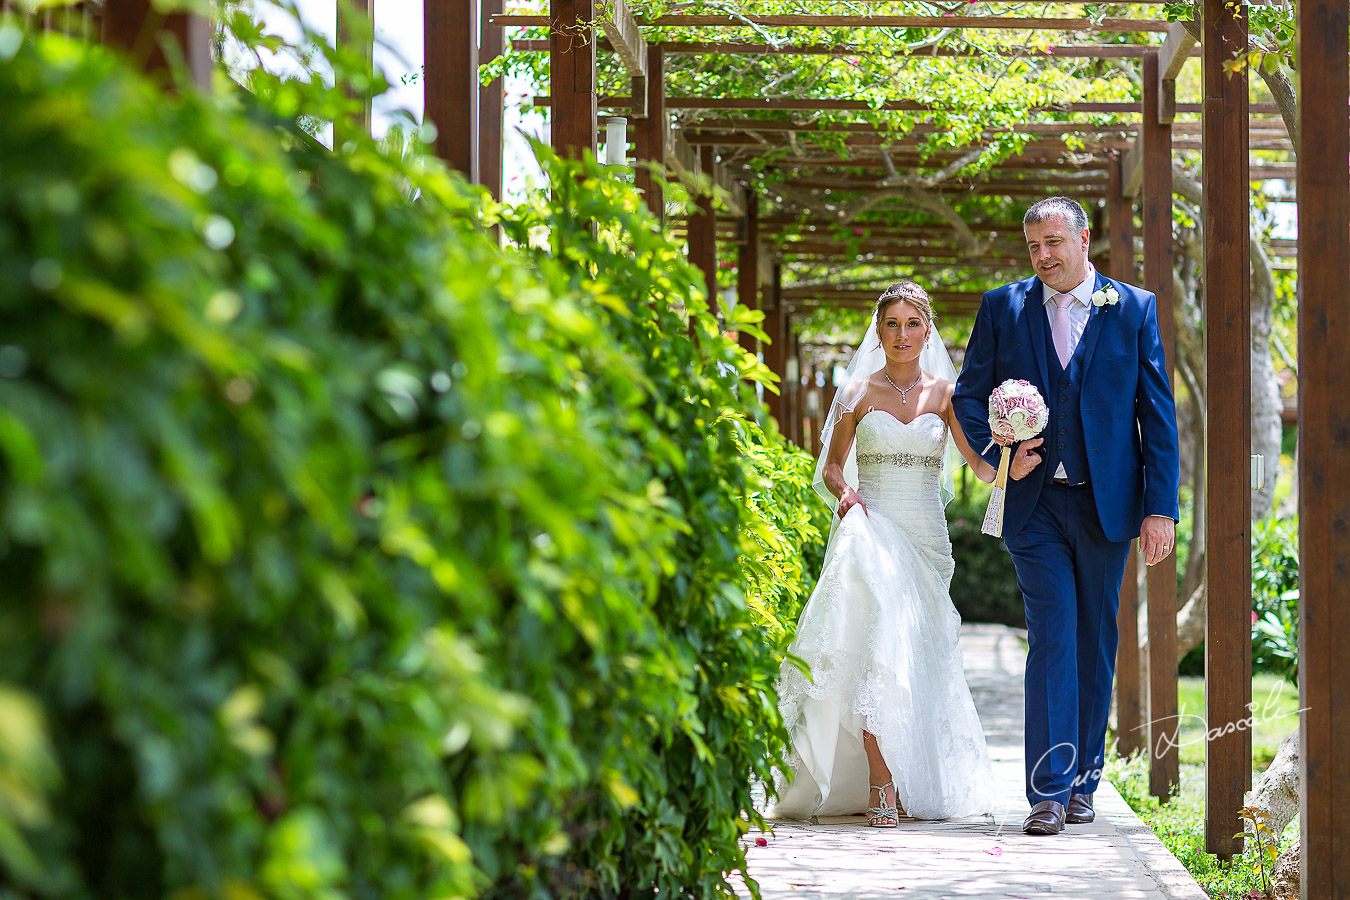 Bride Alicia and her father photographed at Nissi Beach Resort in Ayia Napa, Cyprus by Cristian Dascalu.